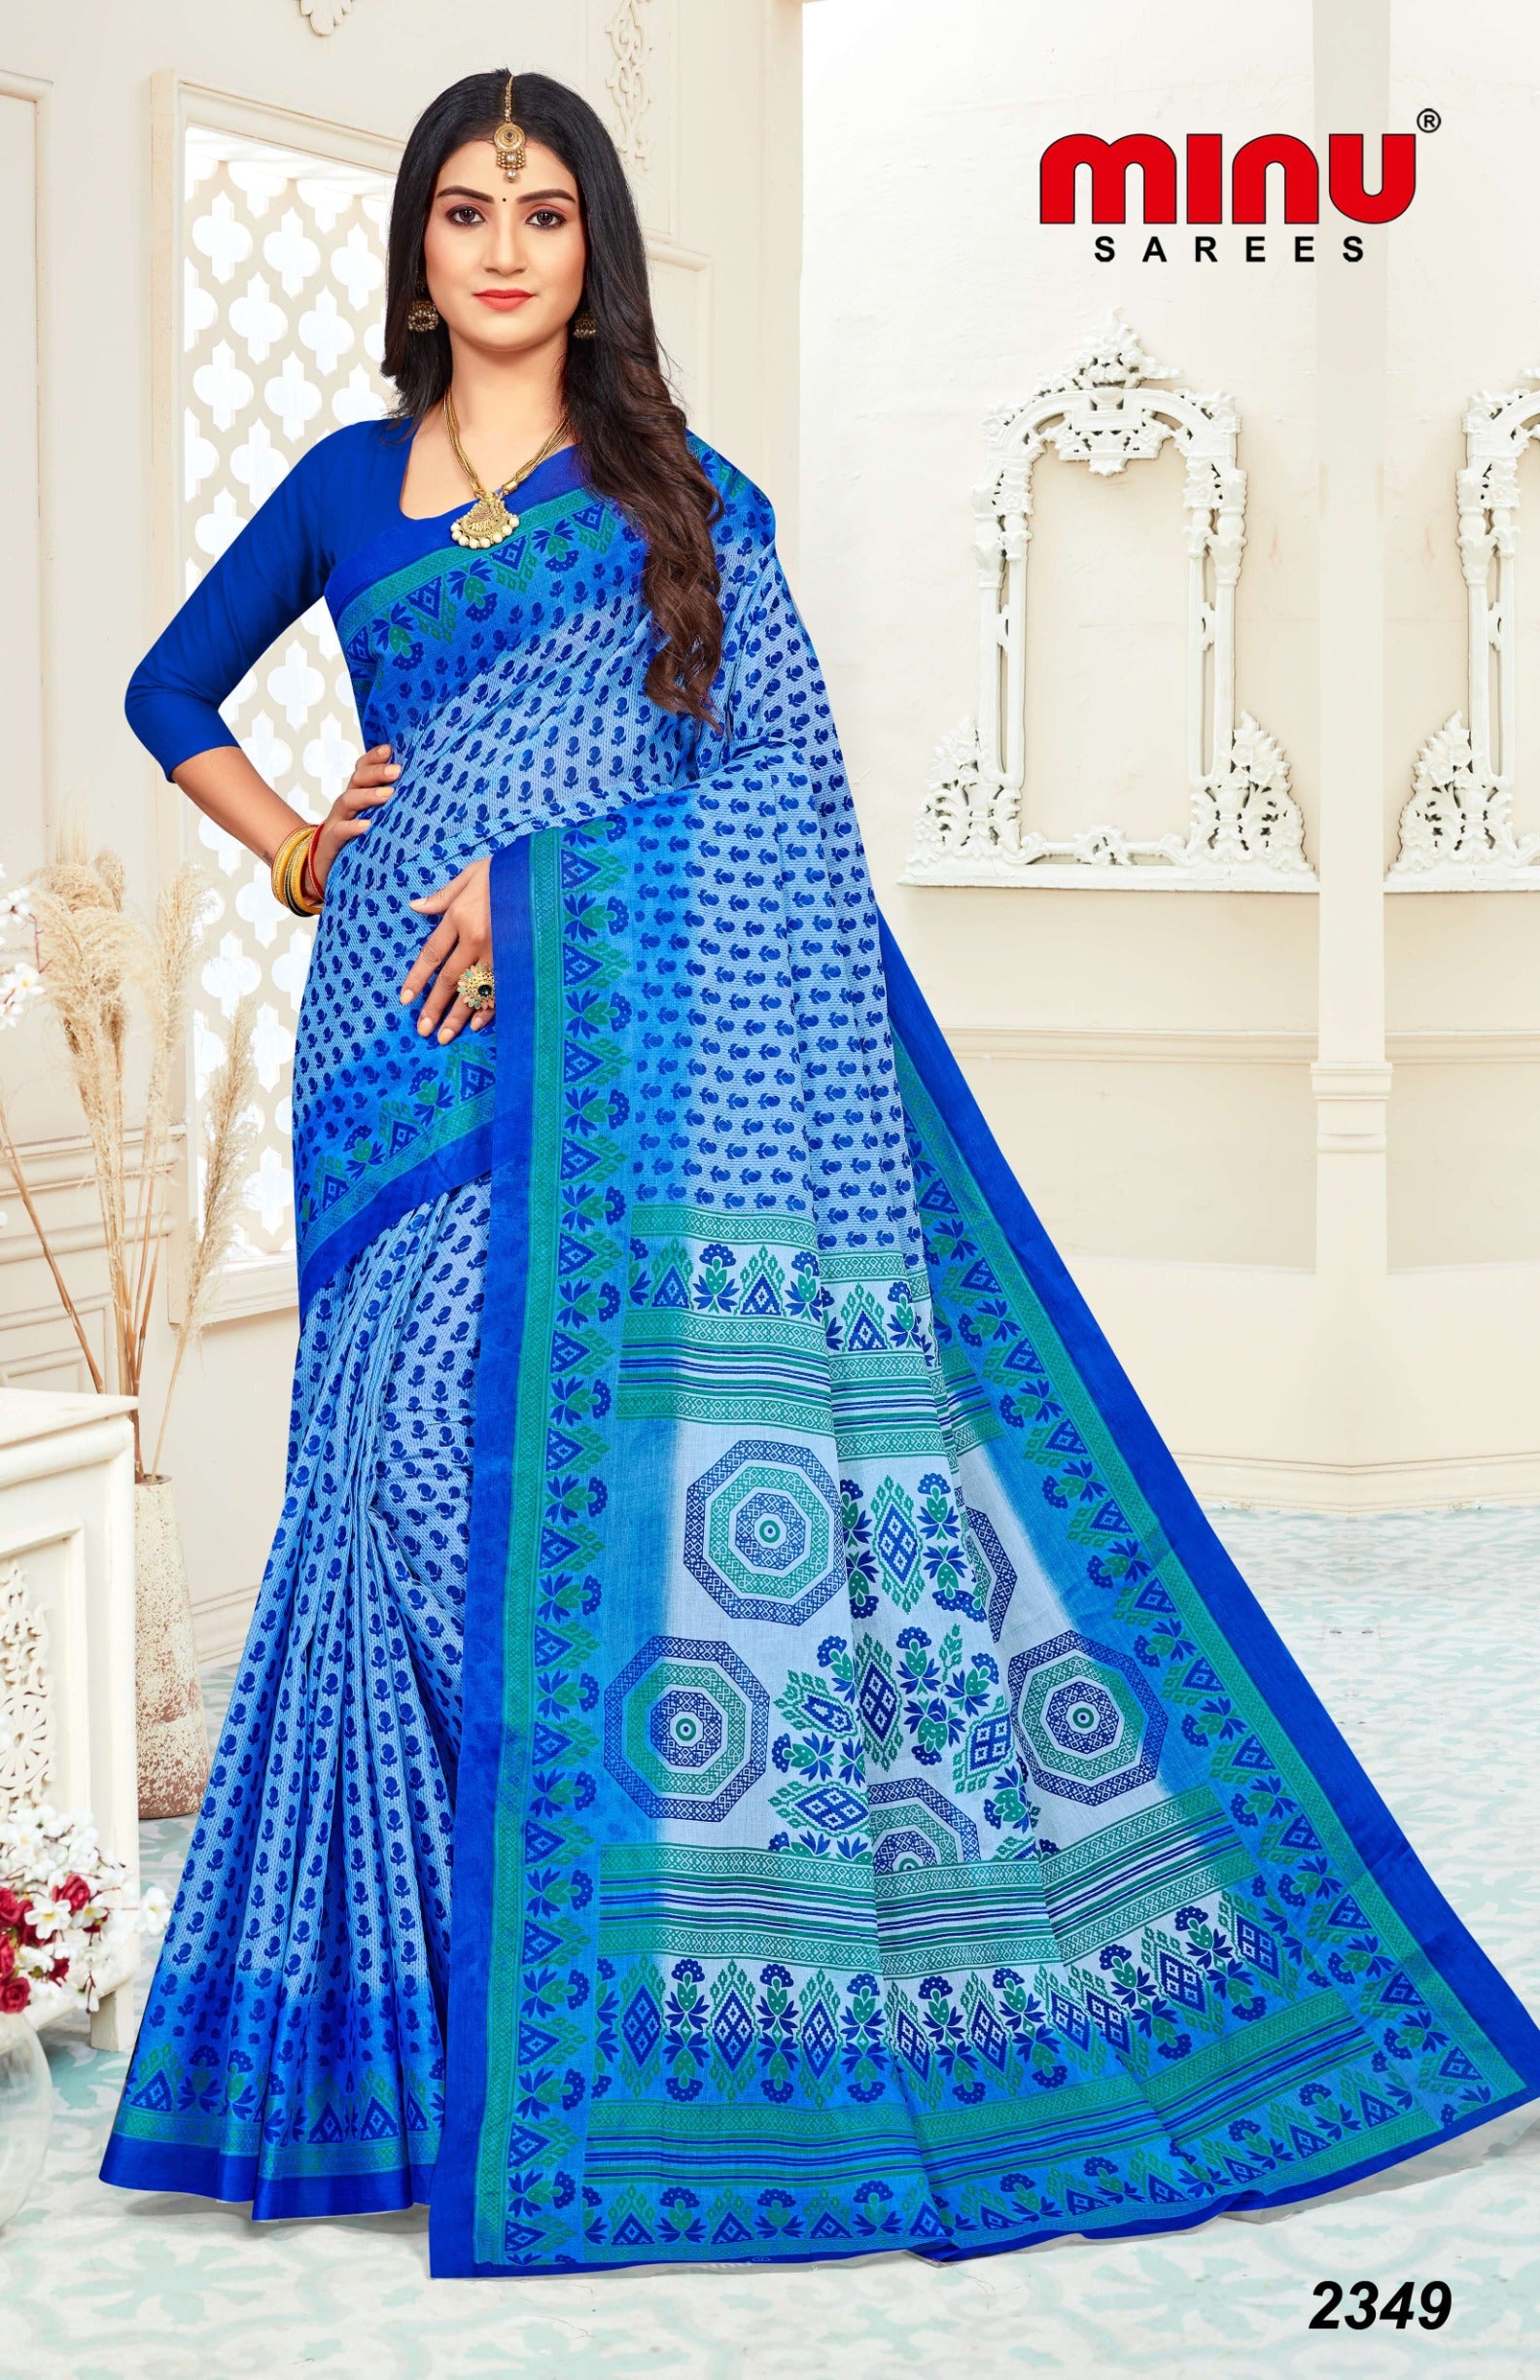 green Printed saree wholesale for women and girls